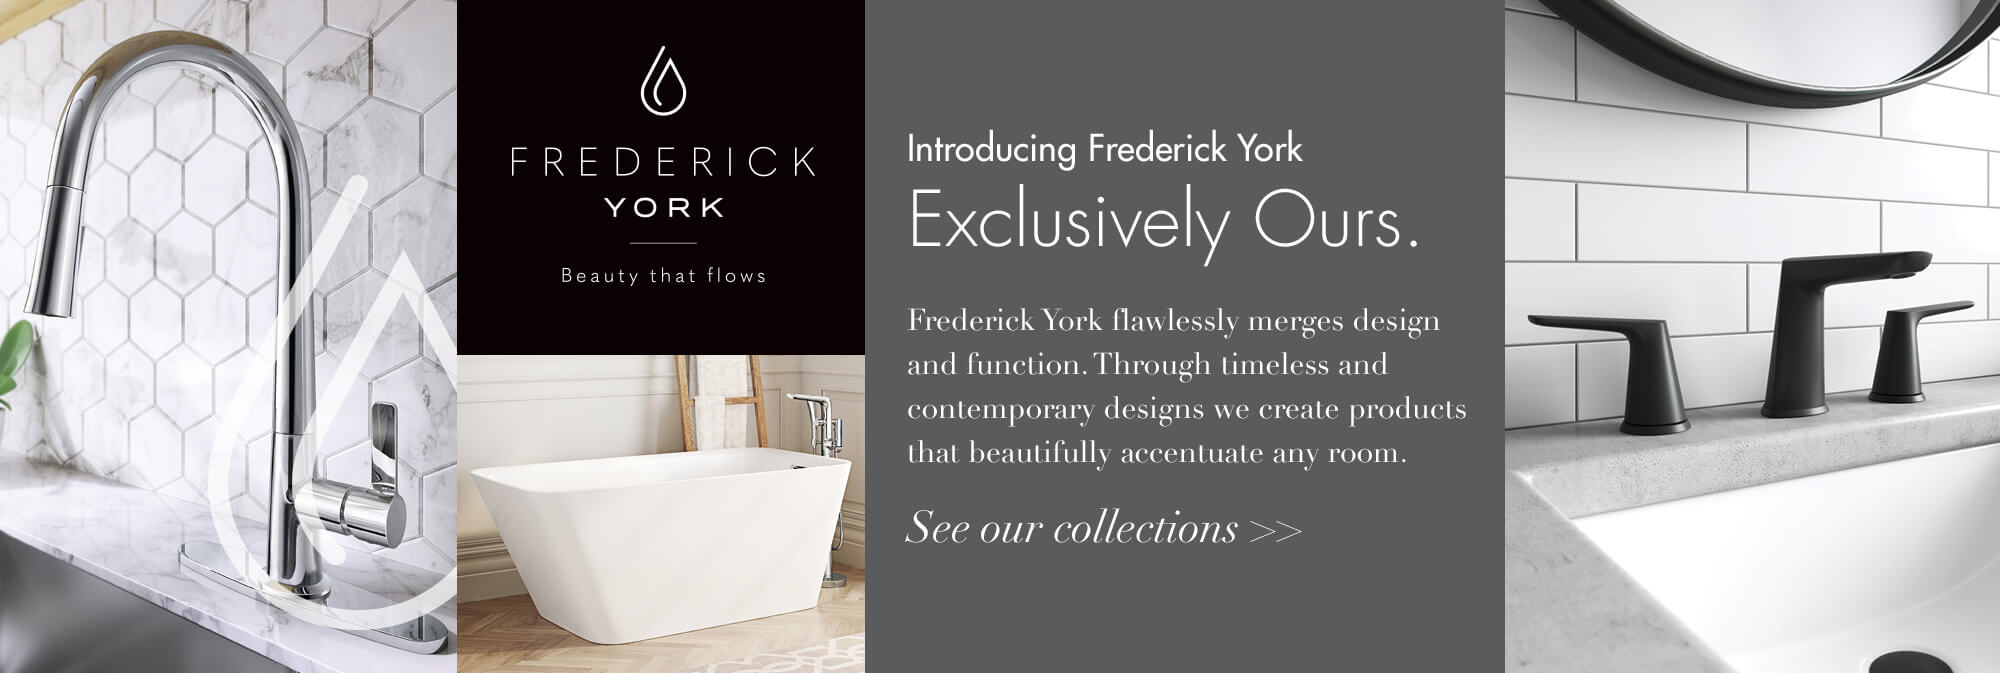 Frederick York available at TAPS Bath